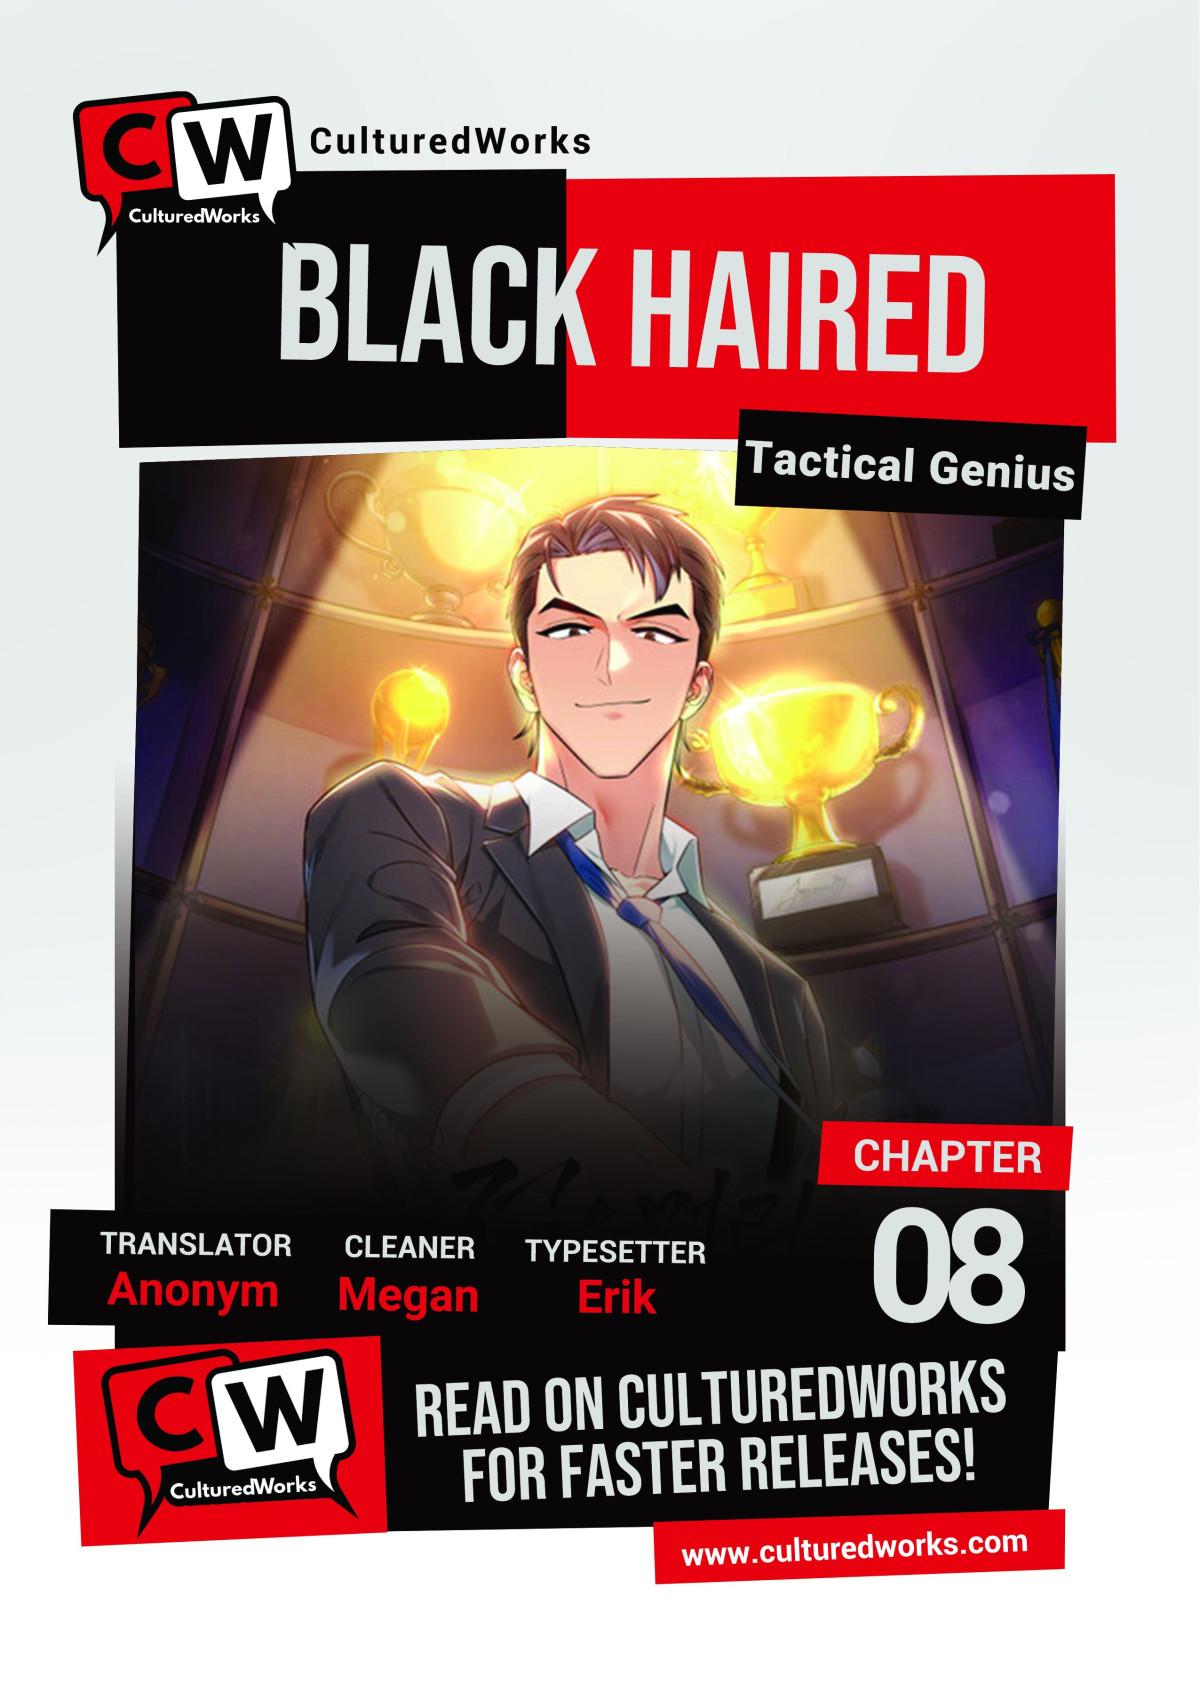 Black-Haired Tactical Genius - Page 1